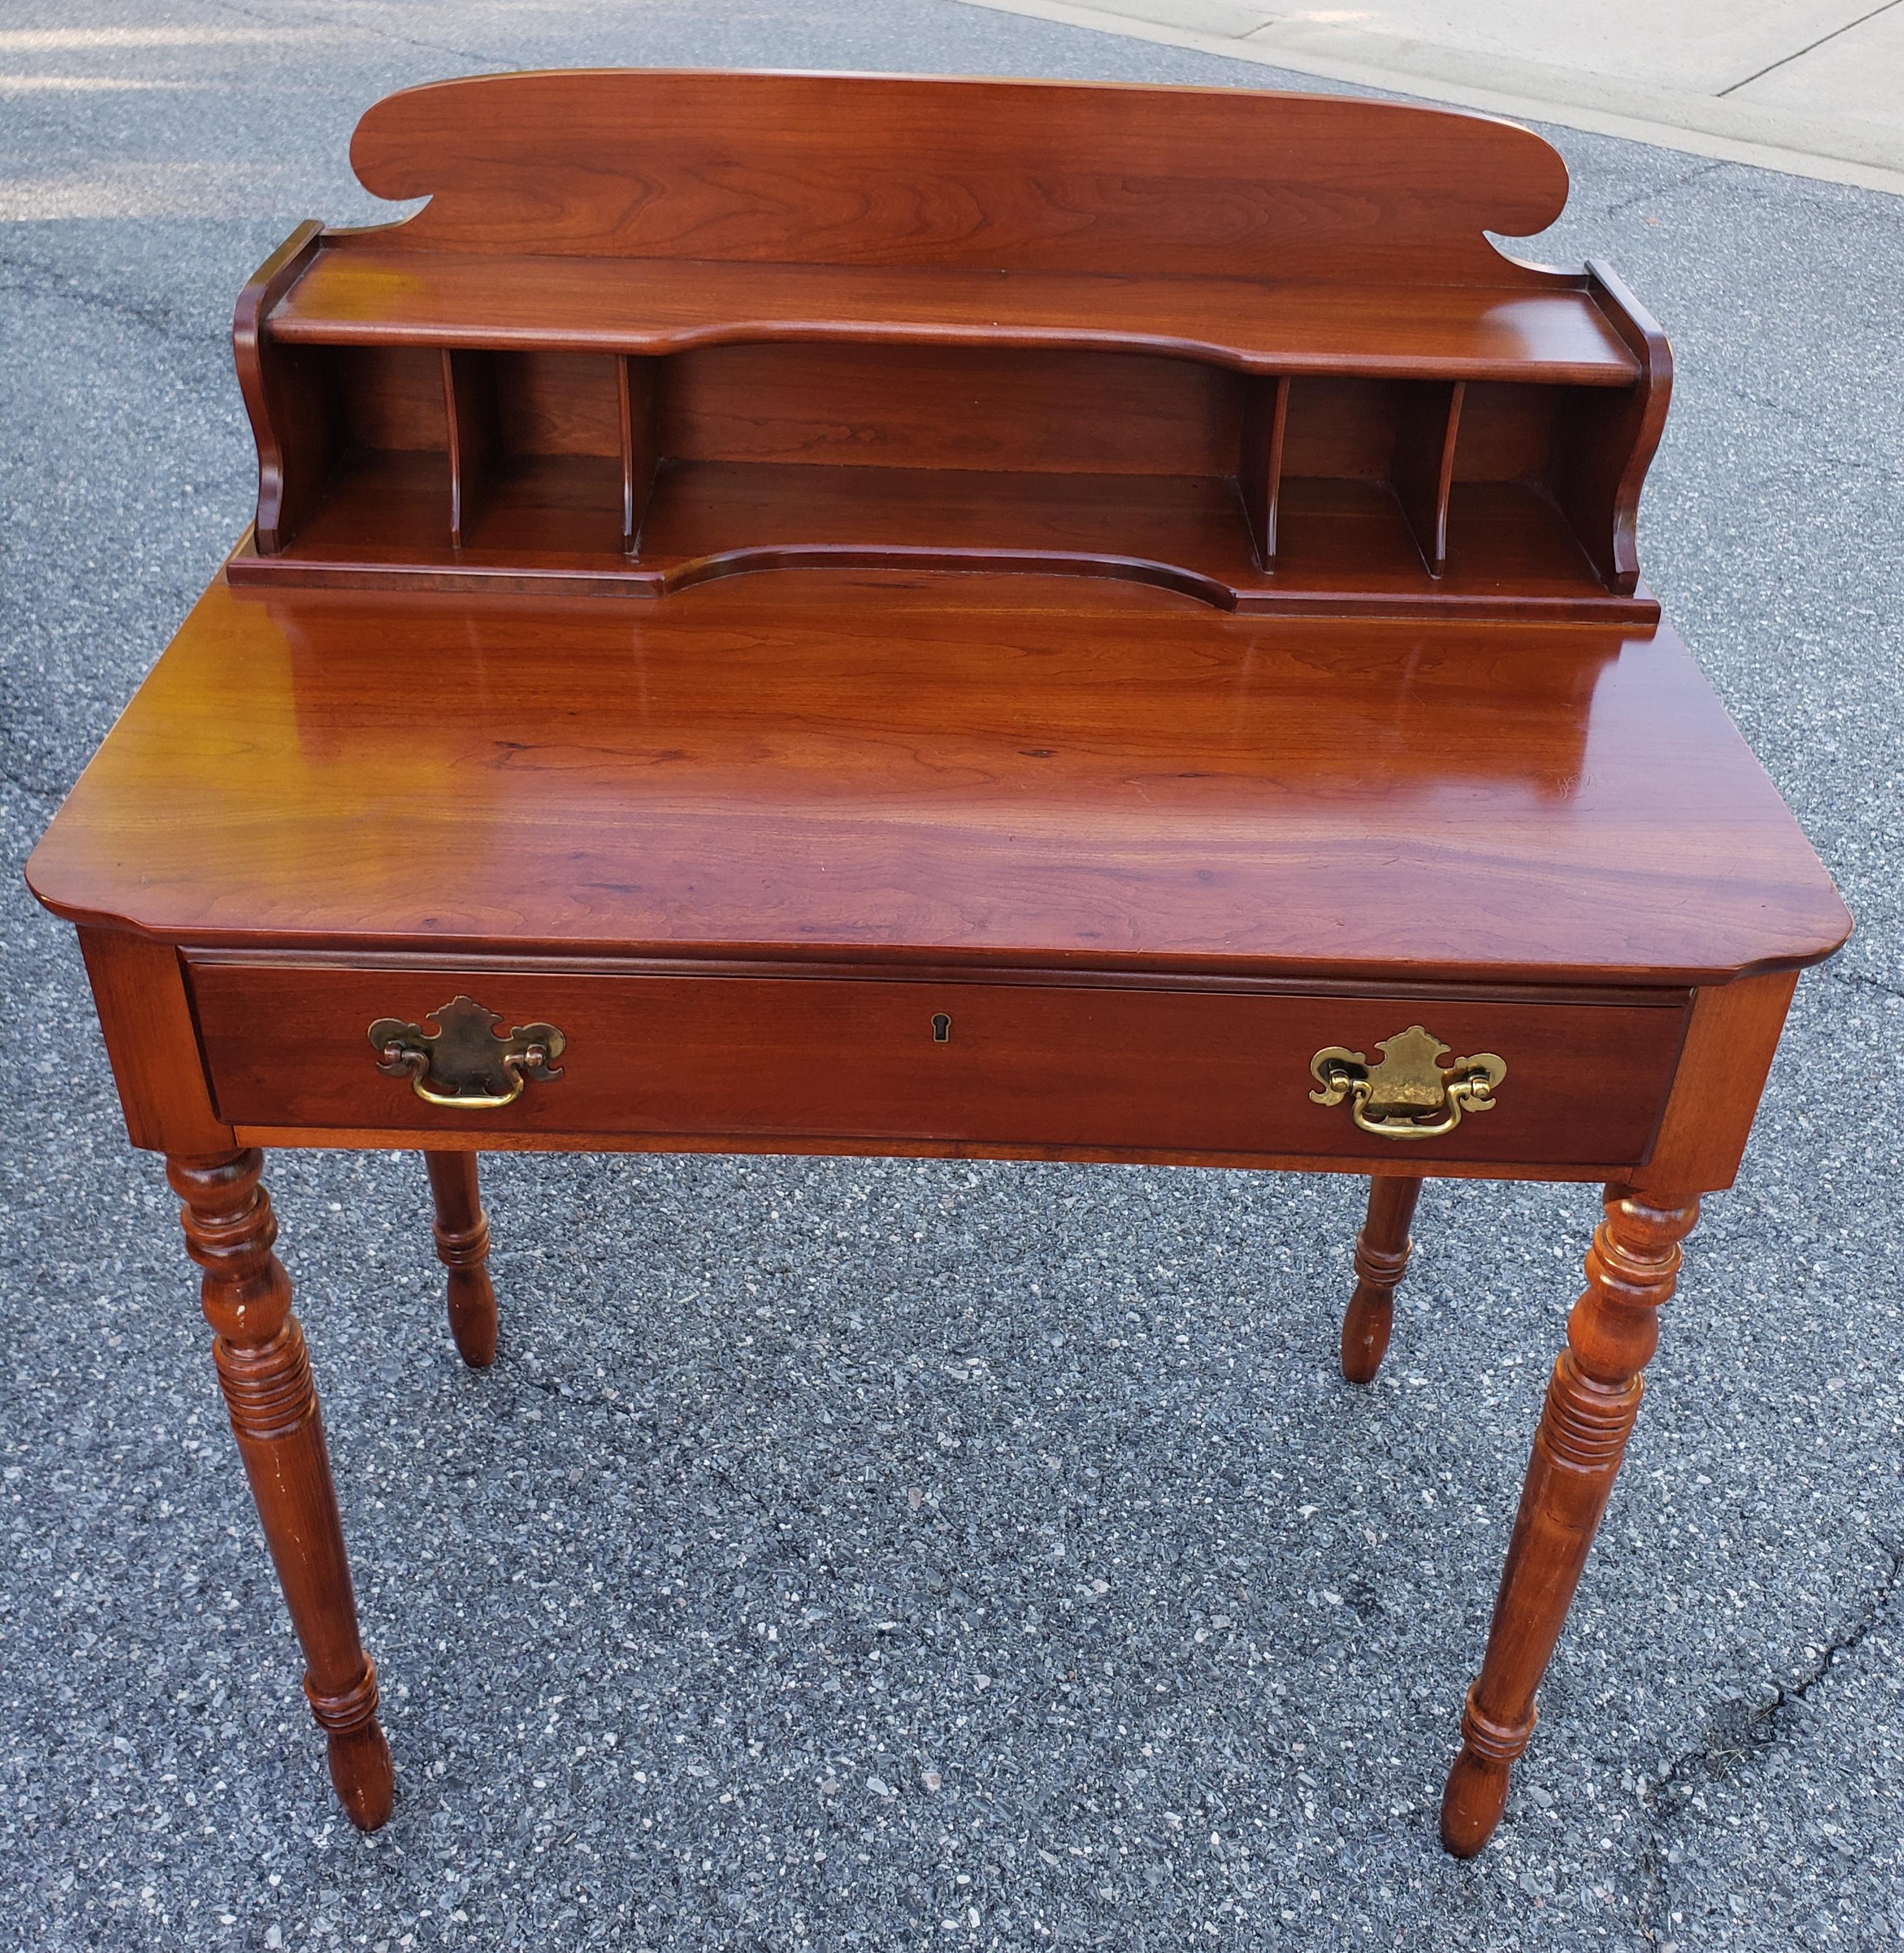 A Mid-Century Lexington Furniture Victorian Style Solid Cherry Writing Desk in great vintage condition. Measures 32